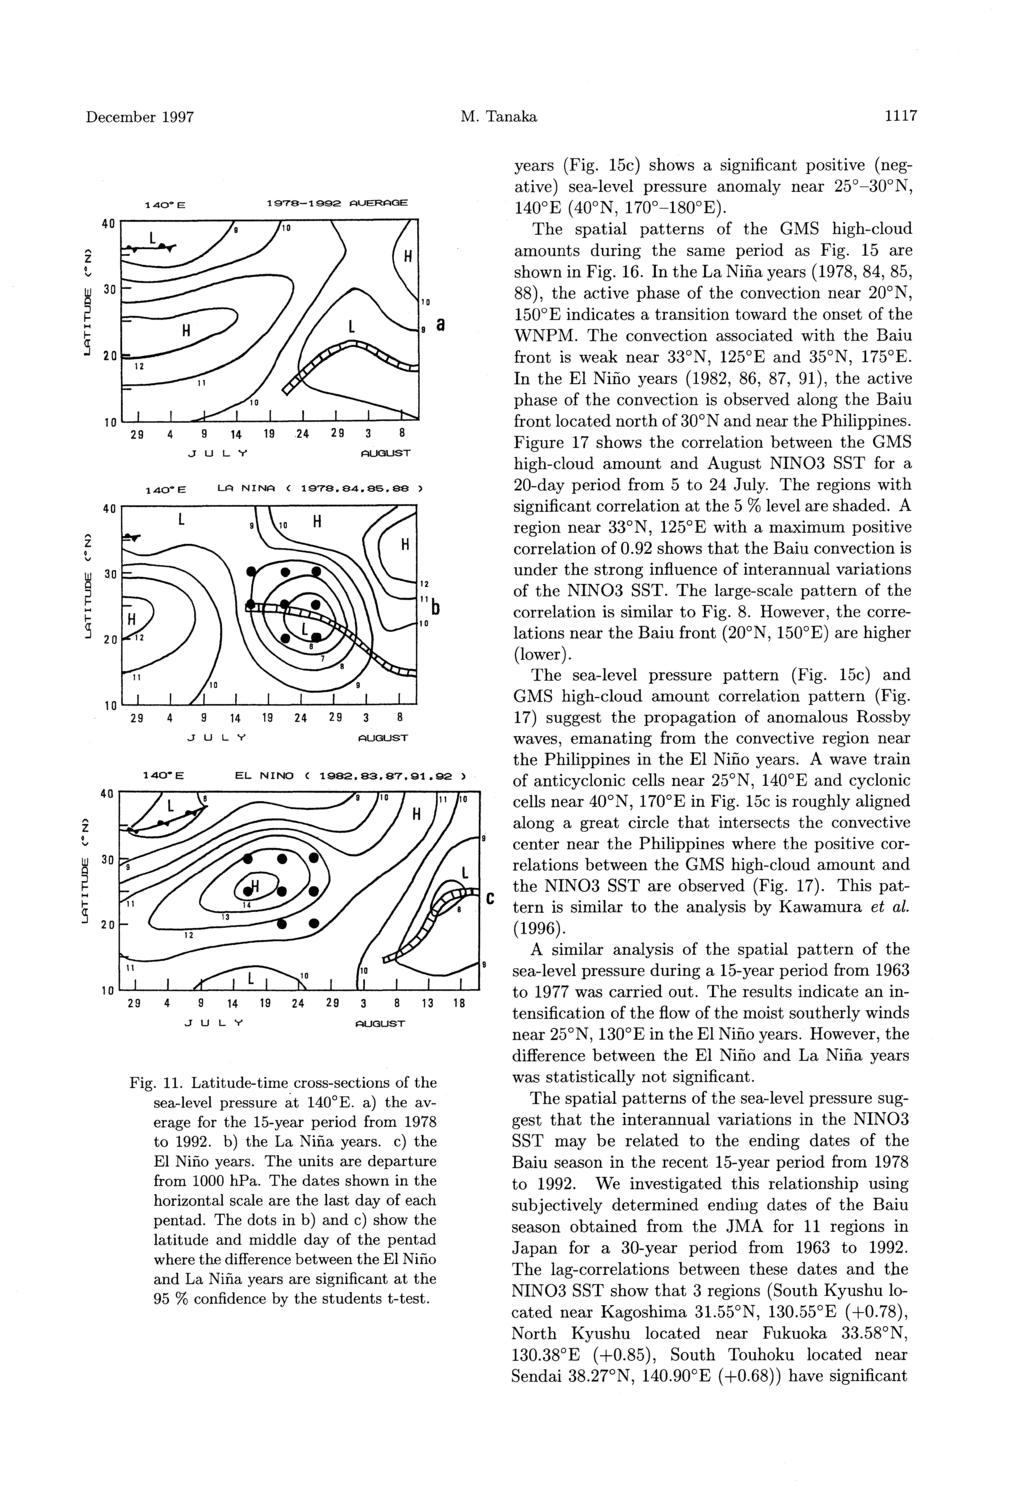 December 1997 M. Tnk 1117 Fig. 11. Ltitude-time cross-sections of the se-level pressure t 140E. ) the verge for the 15-yer period from 1978 to 1992. b) the L Nin yers. c) the El Nino yers.